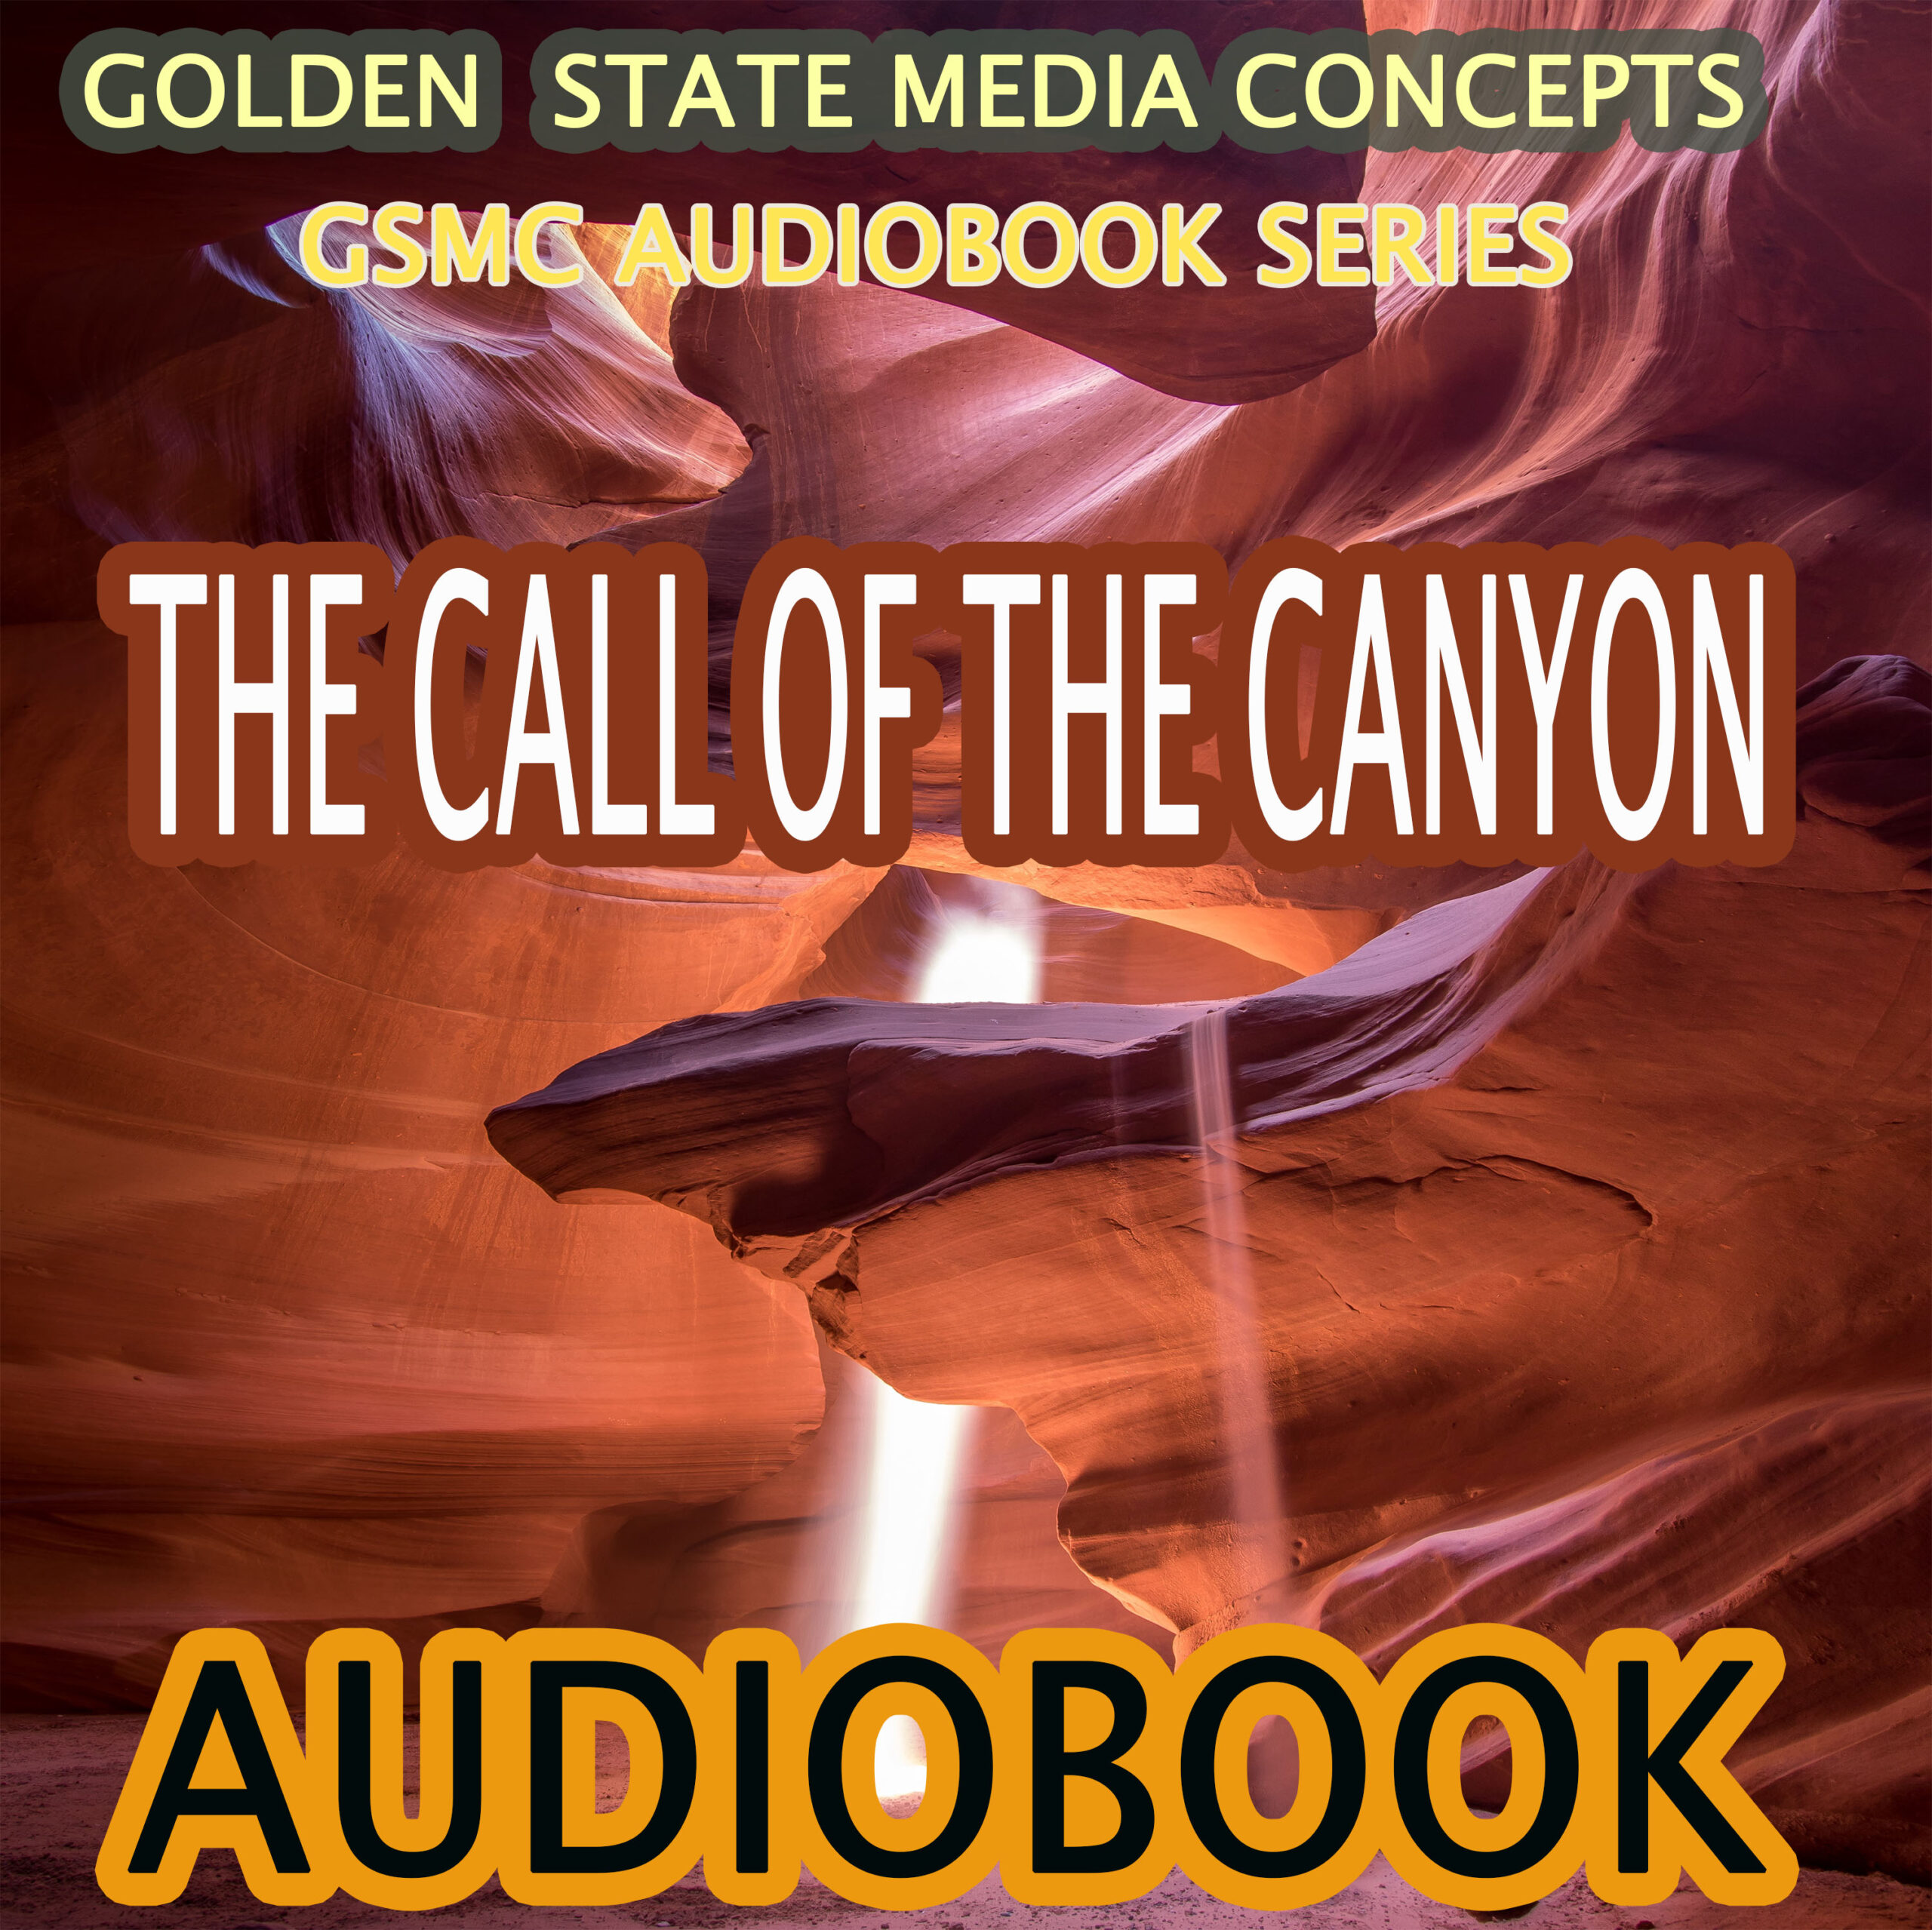 GSMC Audiobook Series: The Call of the Canyon by Zane Grey